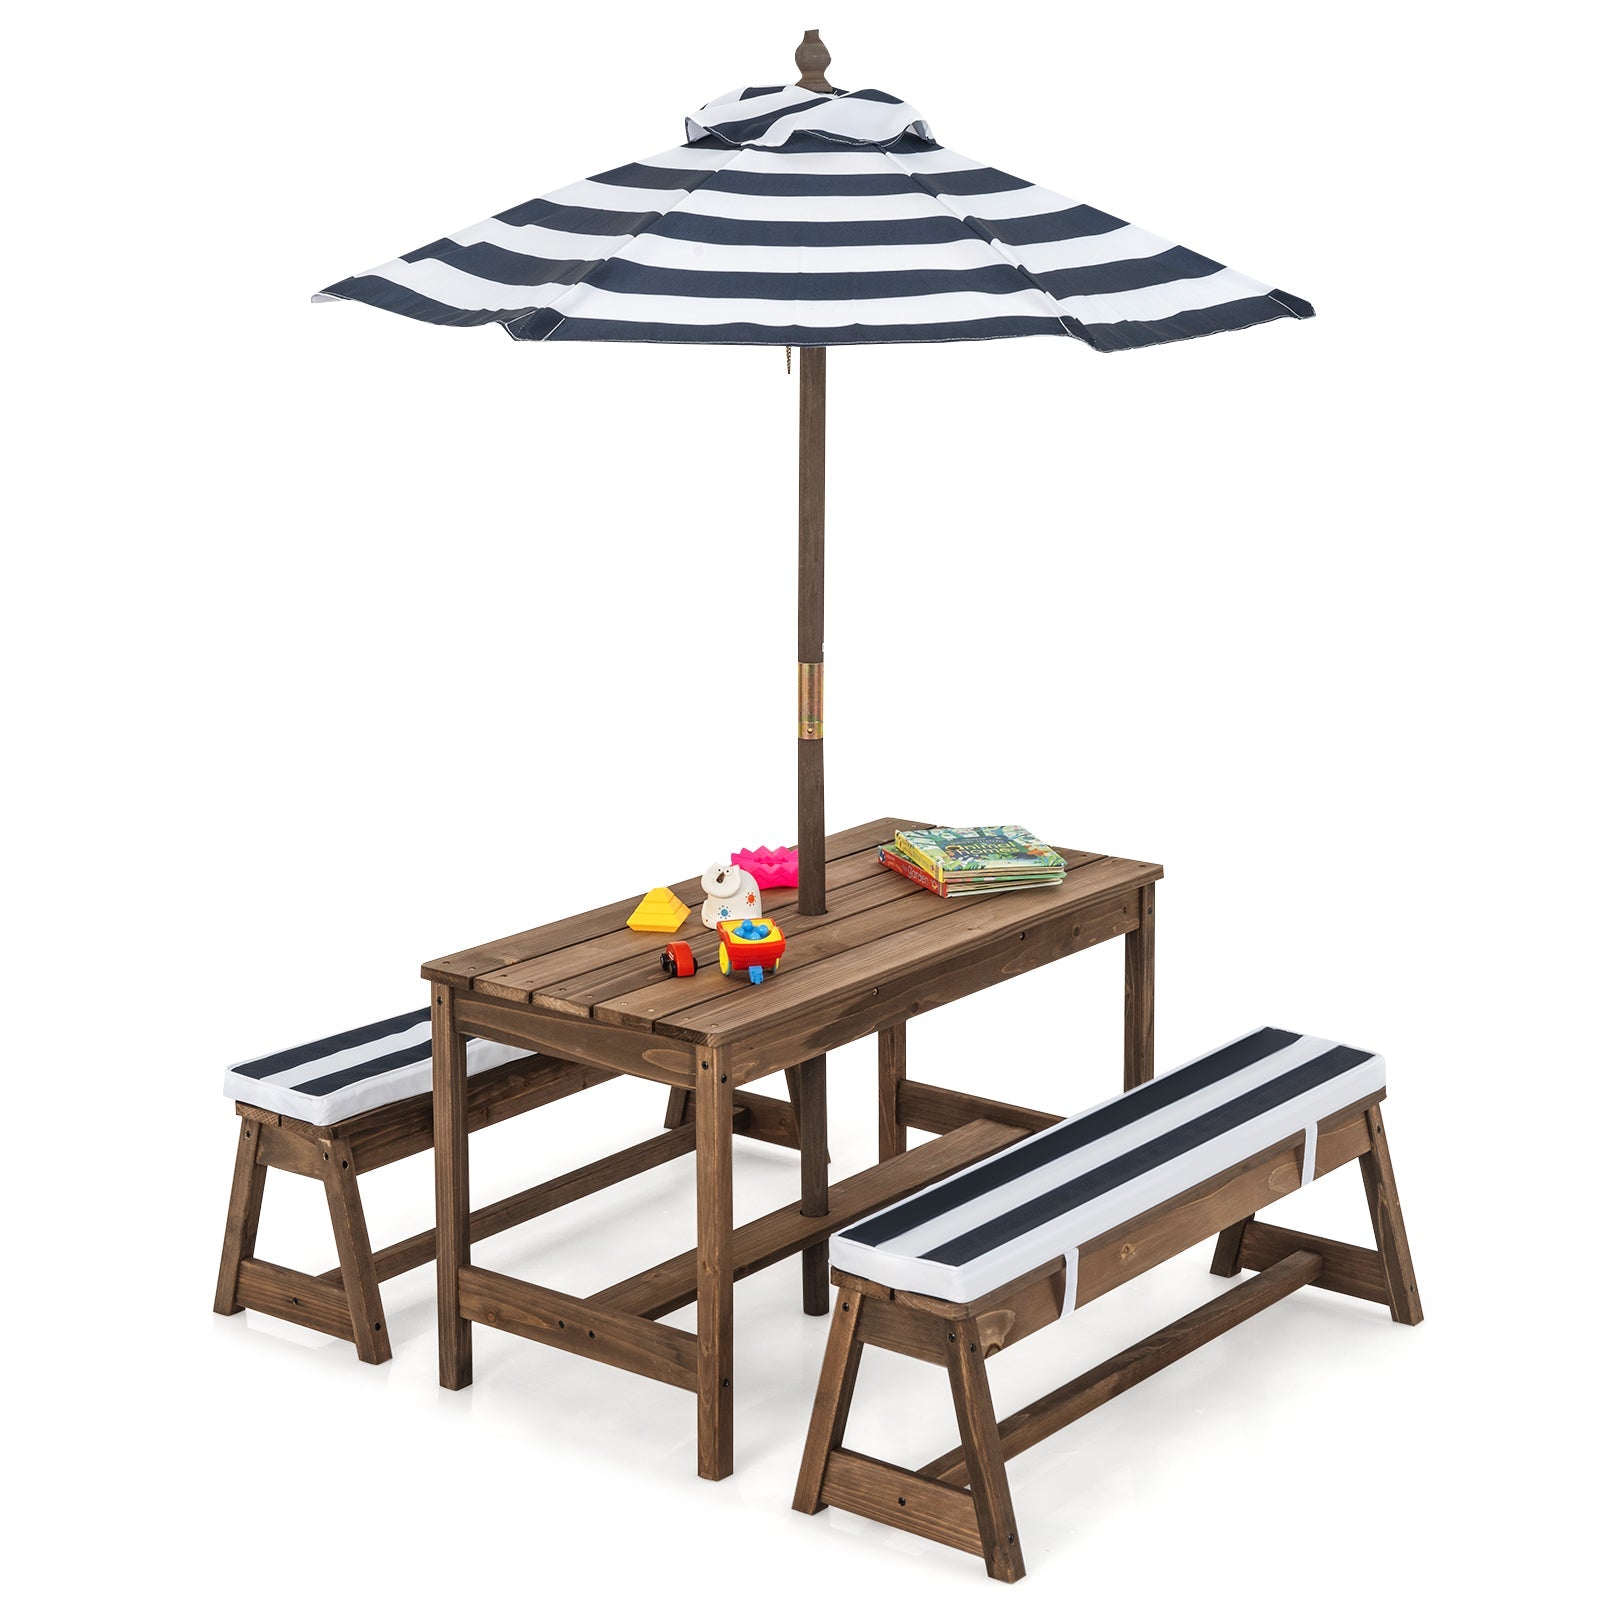 Kids Table & Bench Set: Umbrella & Cushions for Ultimate Indoor-Outdoor Play